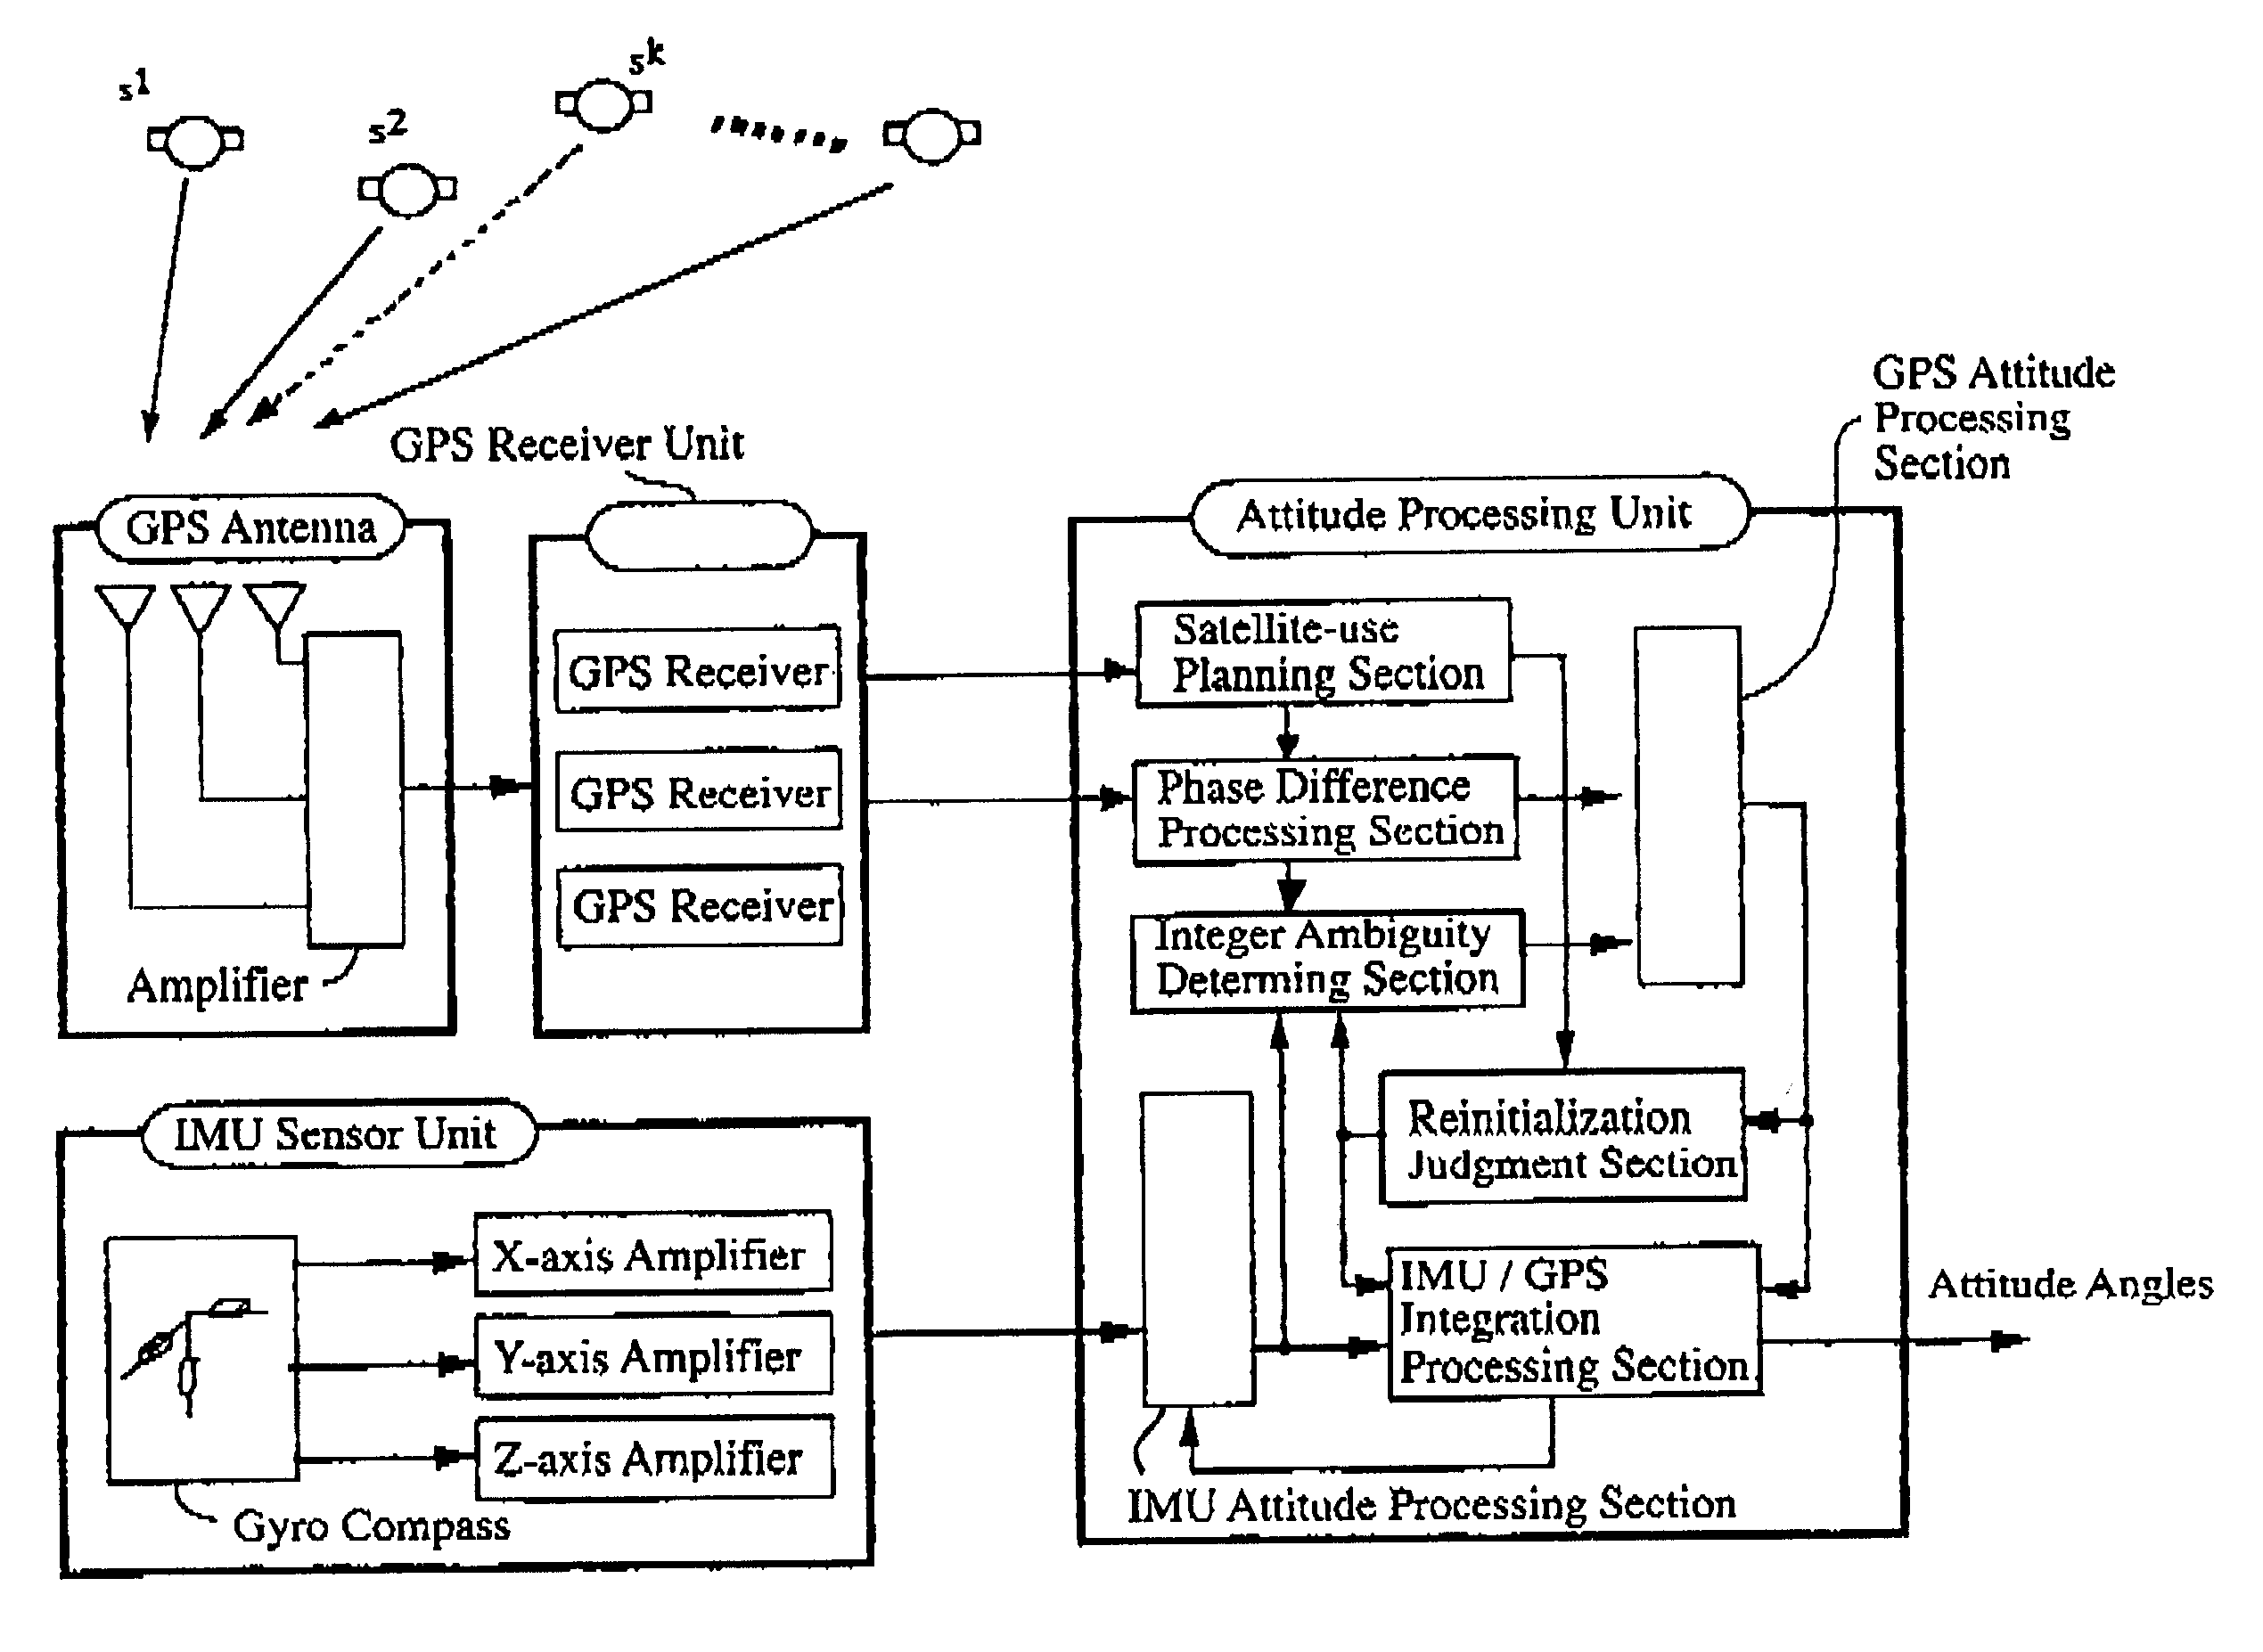 Carrier phase-based relative positioning apparatus